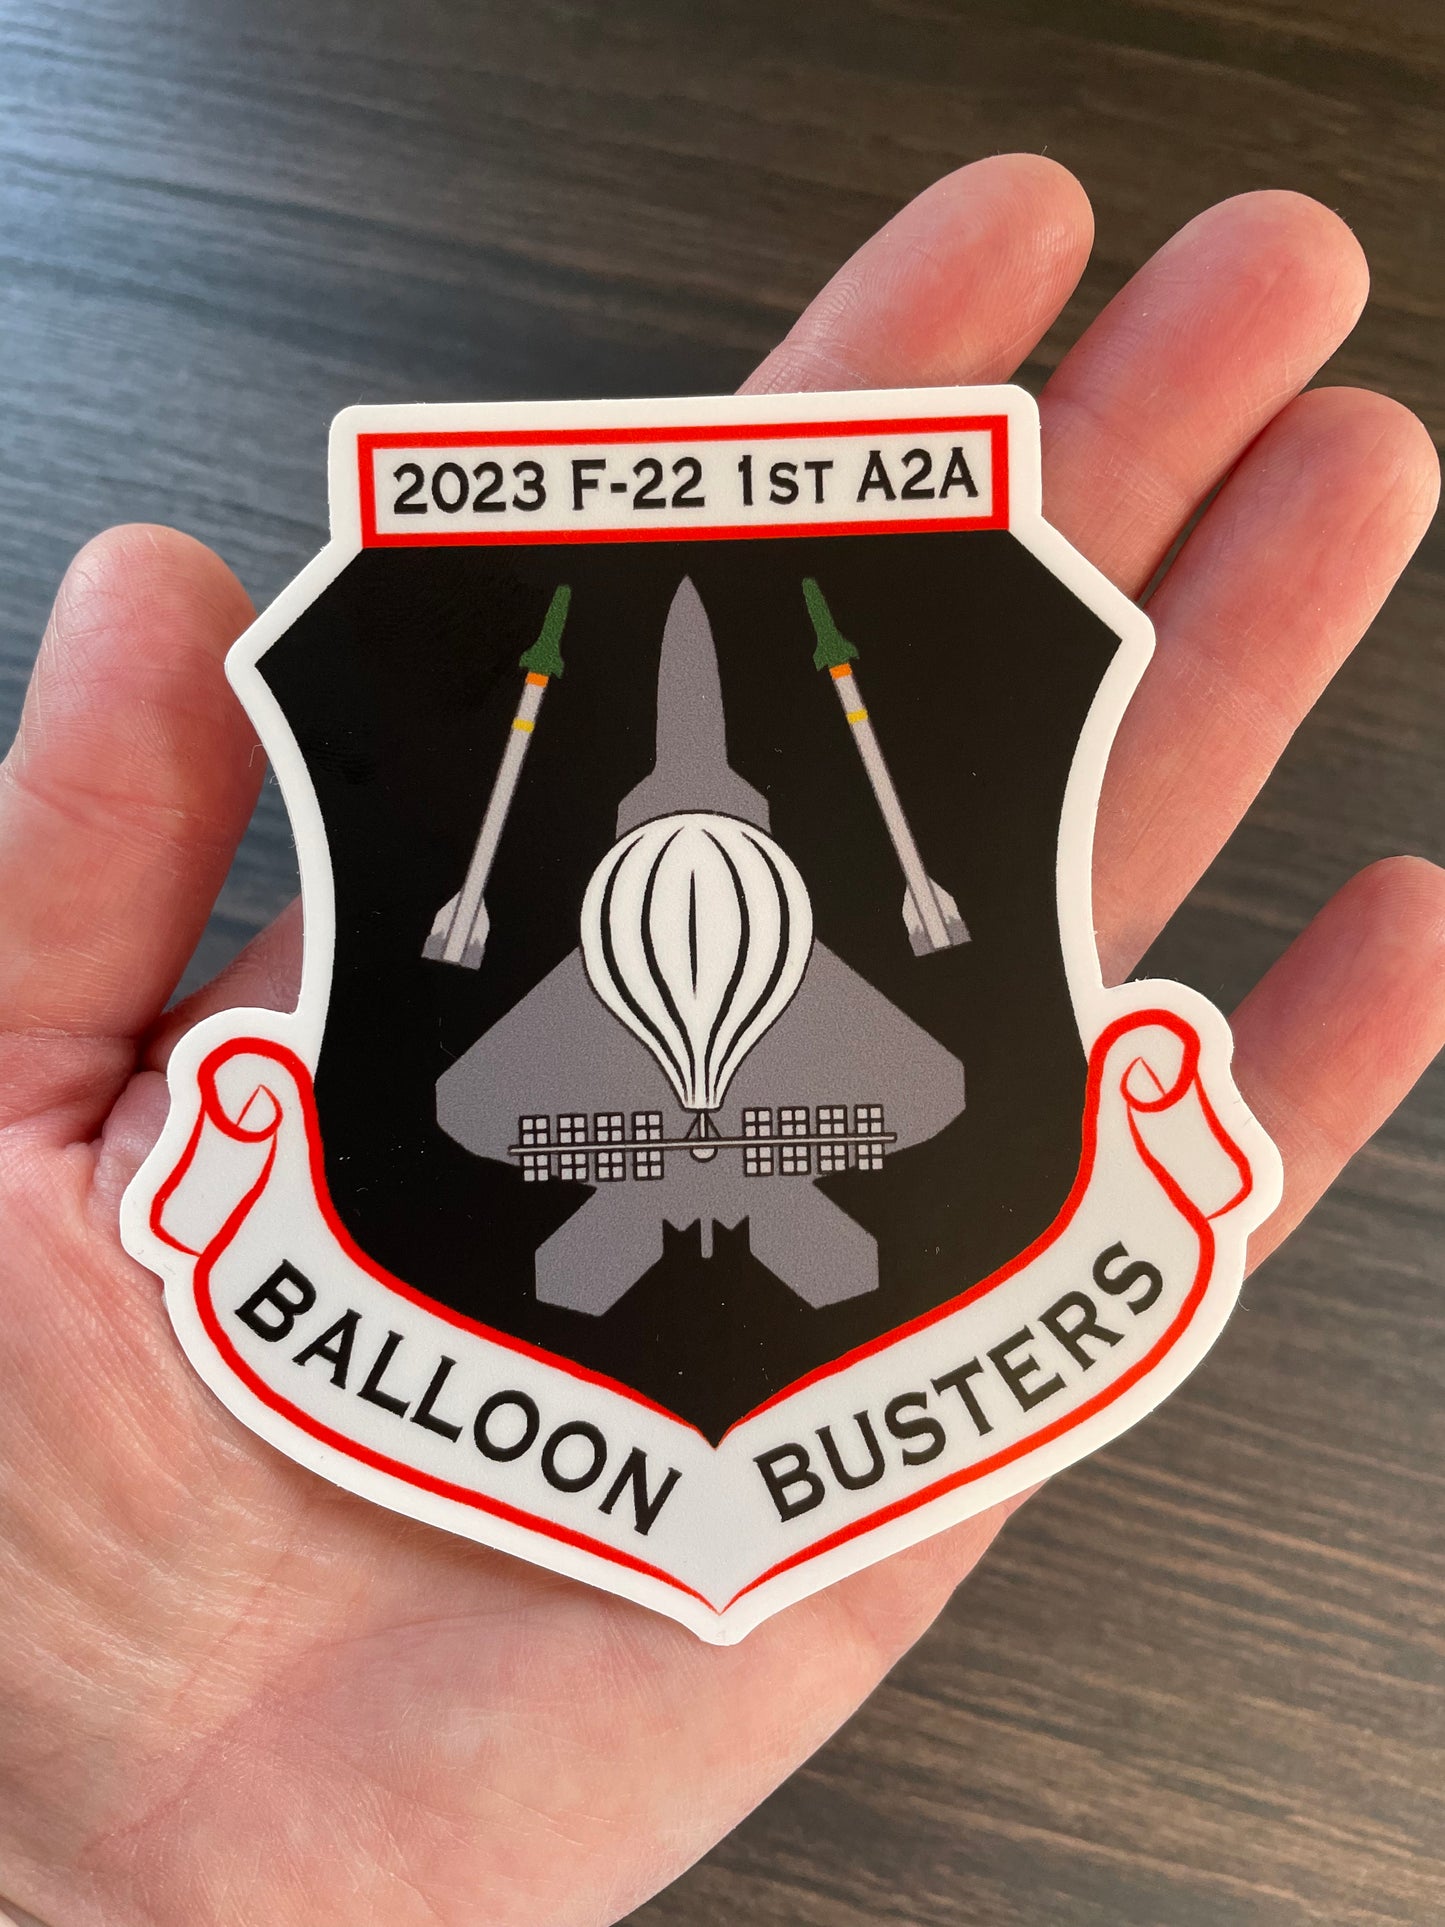 F22 Raptor “Balloon Busters” First Air-To-Air Kill Tribute Mission Patch Sticker